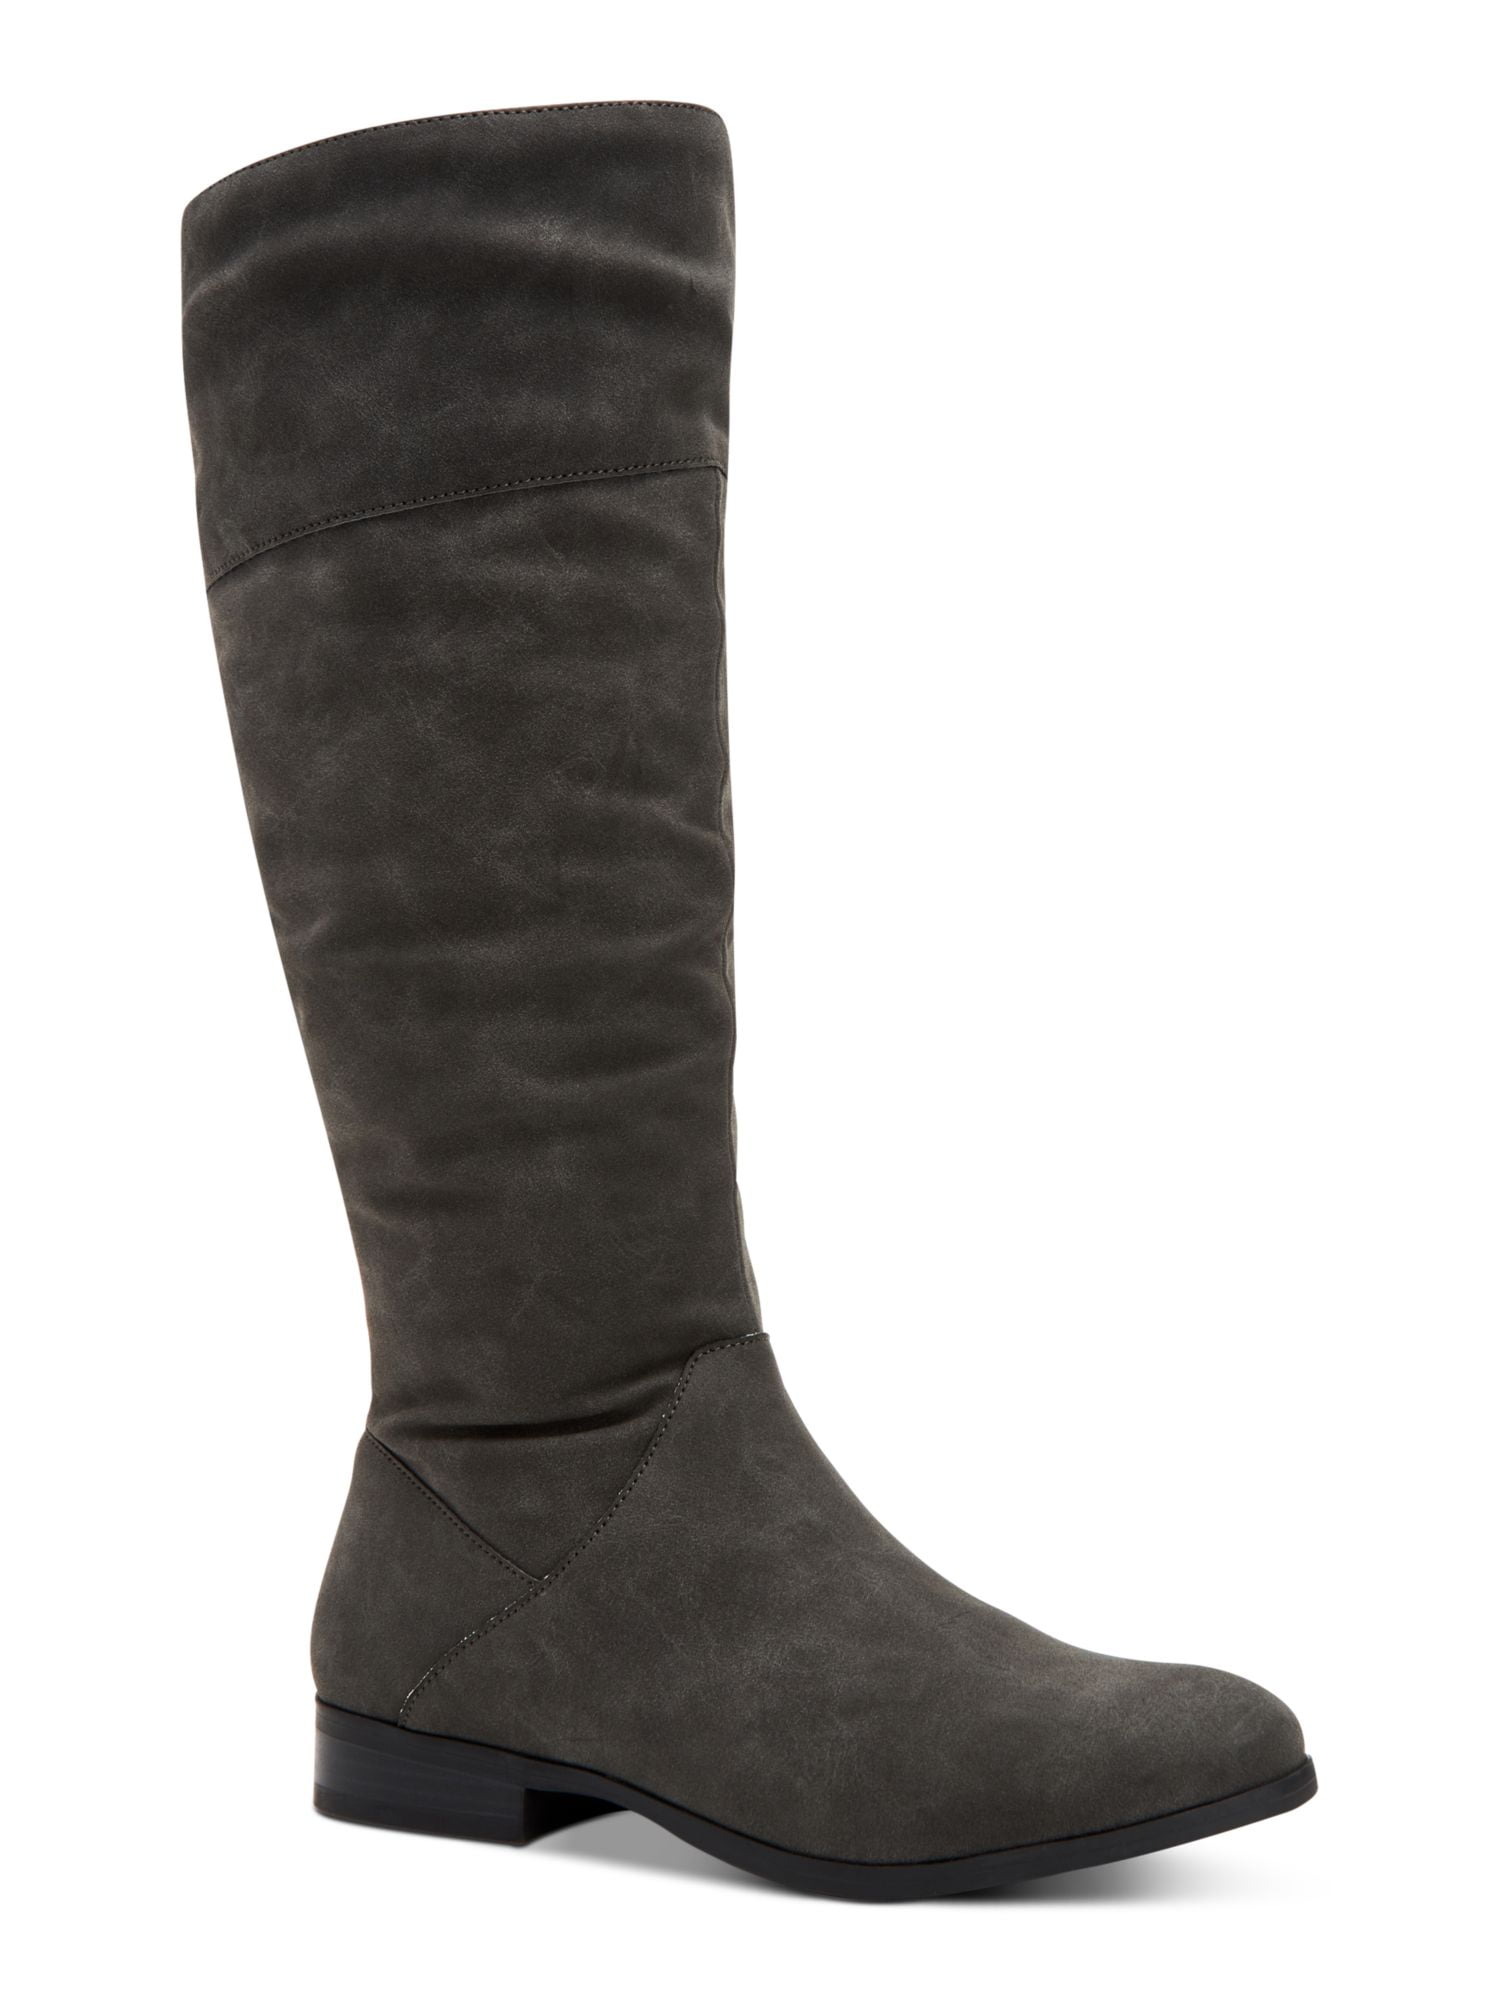 STYLE & COMPANY Womens Gray Ruched At Shaft Zip-Up Boots 8 M